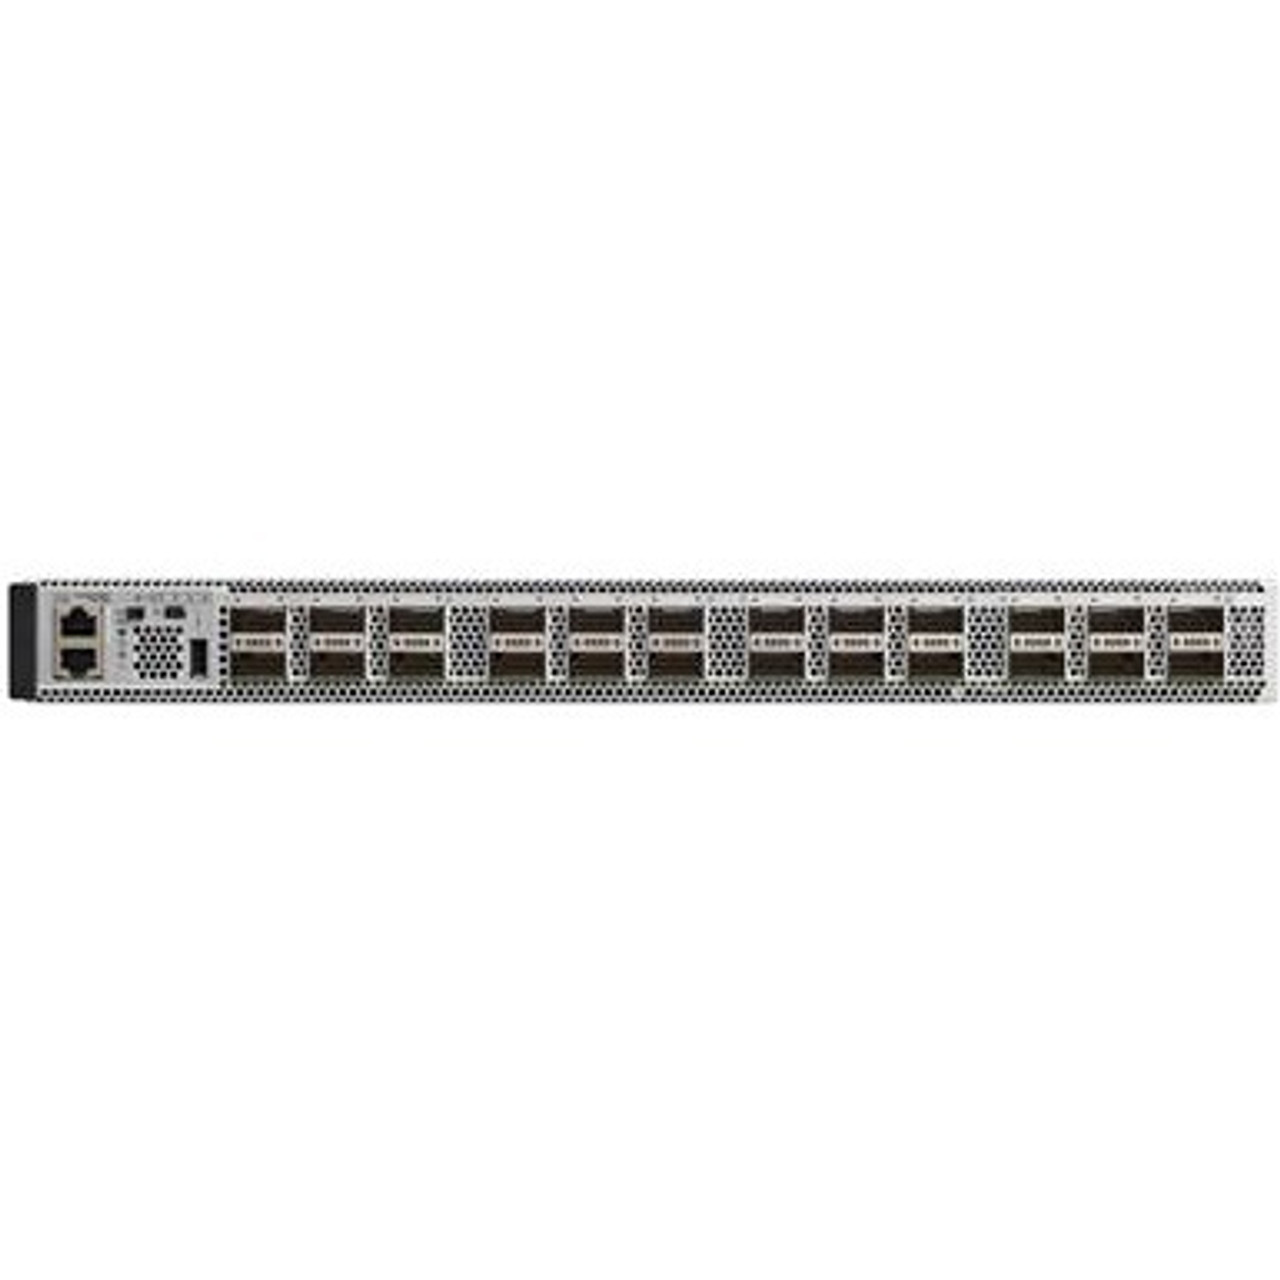 C9500-24Y4C-A Cisco Catalyst 9500 24-Ports SFP+ 10GBase-X Manageable Layer 3 Rack-mountable 1U Gigabit Ethernet Switch (Refurbished)